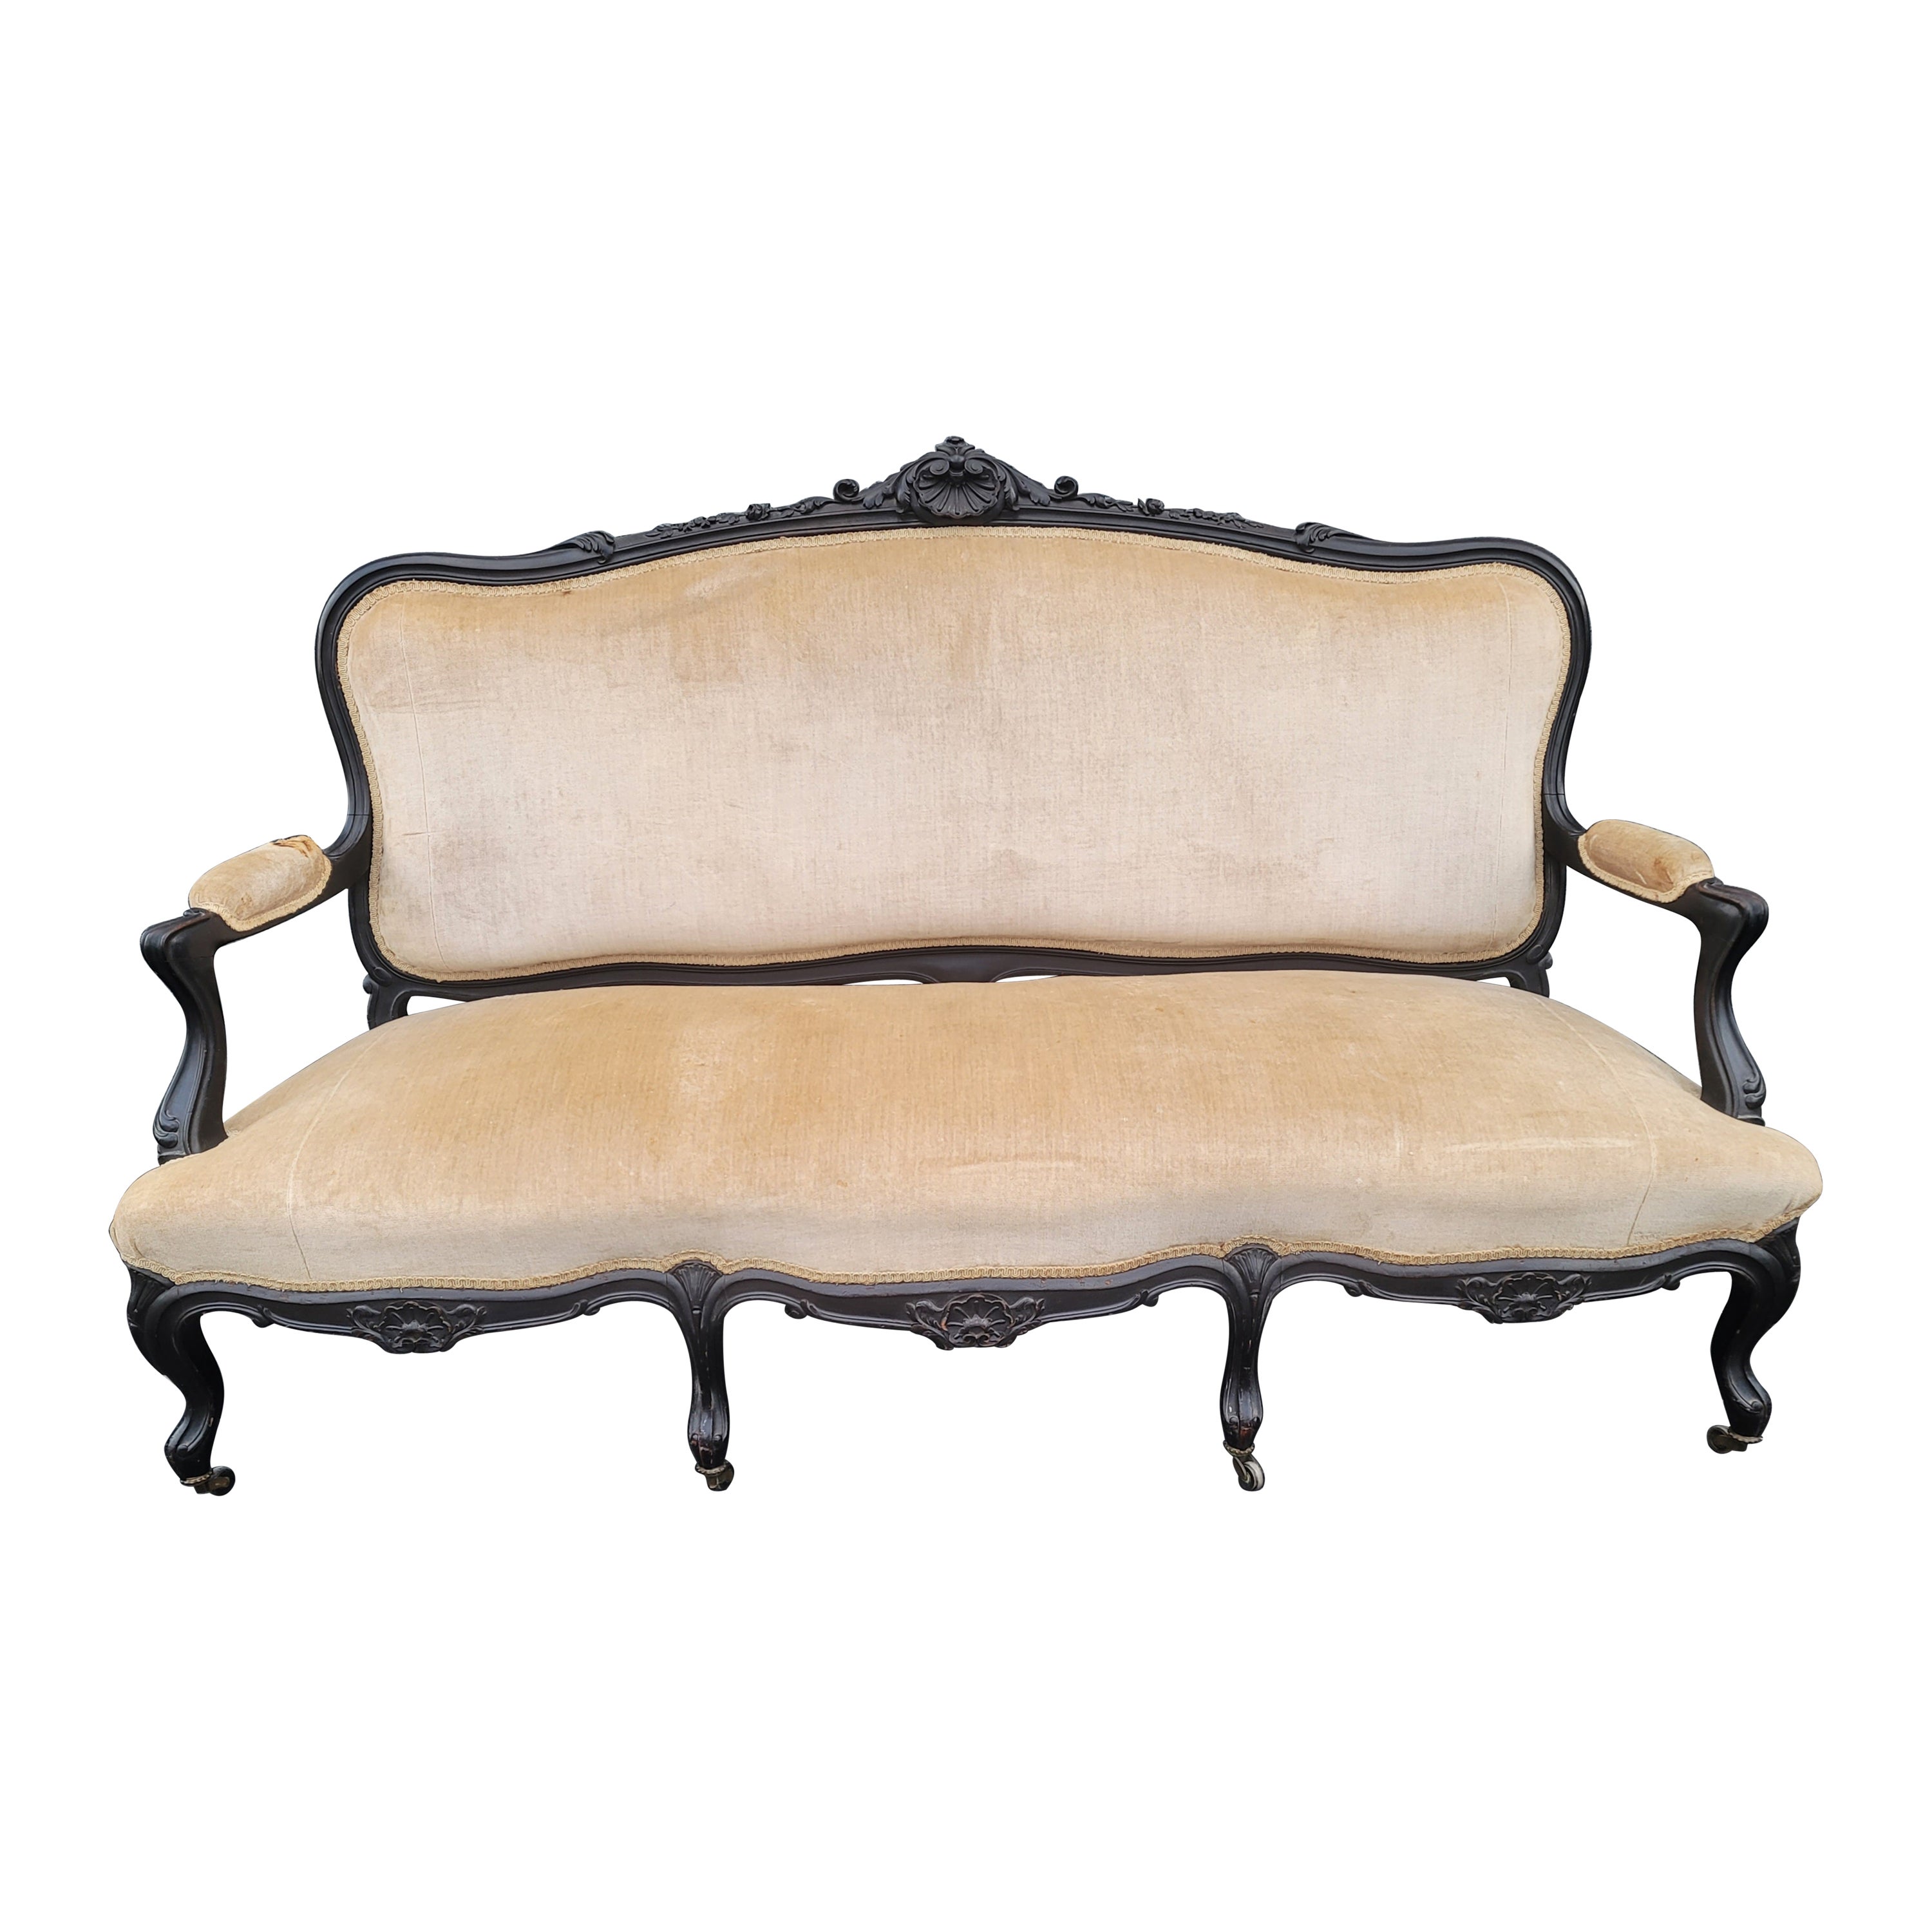 1890s Louis XV Carved, Ebonized and Upholstered Sofa